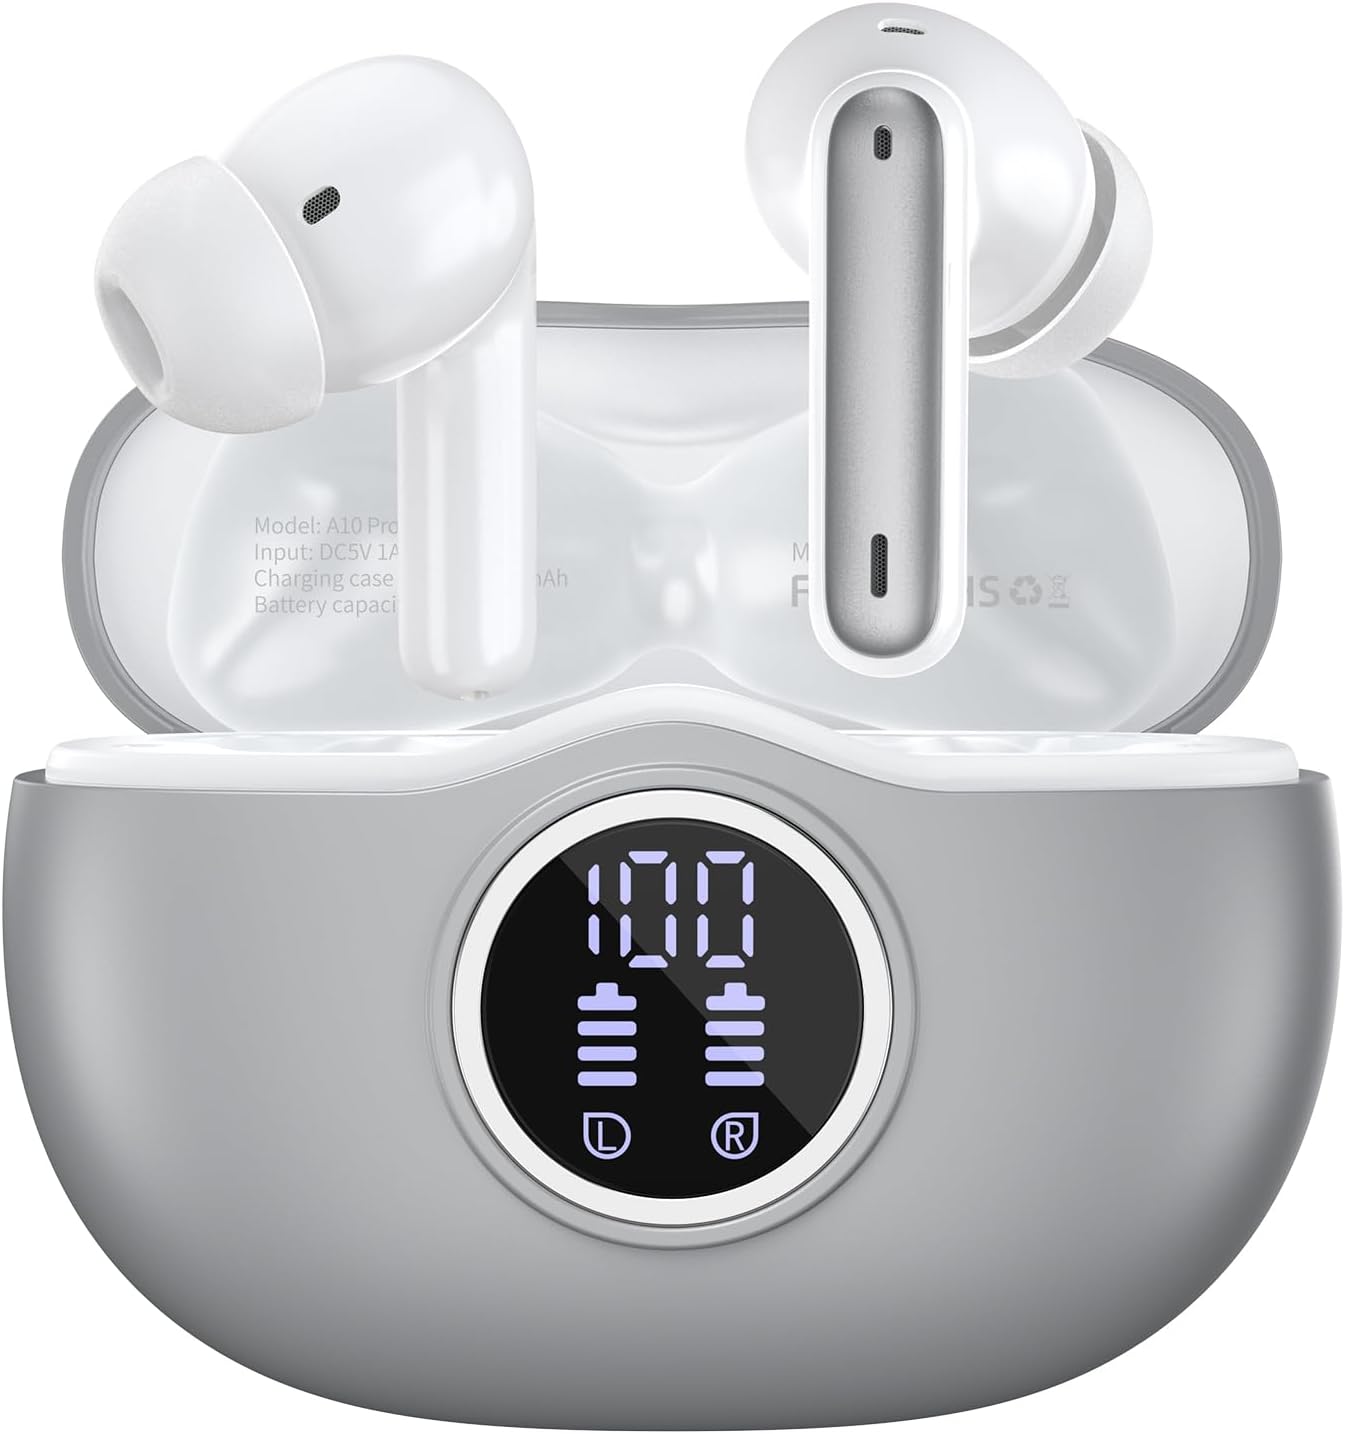 Wireless Earbuds Bluetooth 5.3 Headphones 40 Hrs Playtime with LED Display, Deep Bass Stereo and Noise Cancelling Bluetooth Ear Buds IP7 Waterproof Wireless Earphones for iPhone Android, Grey